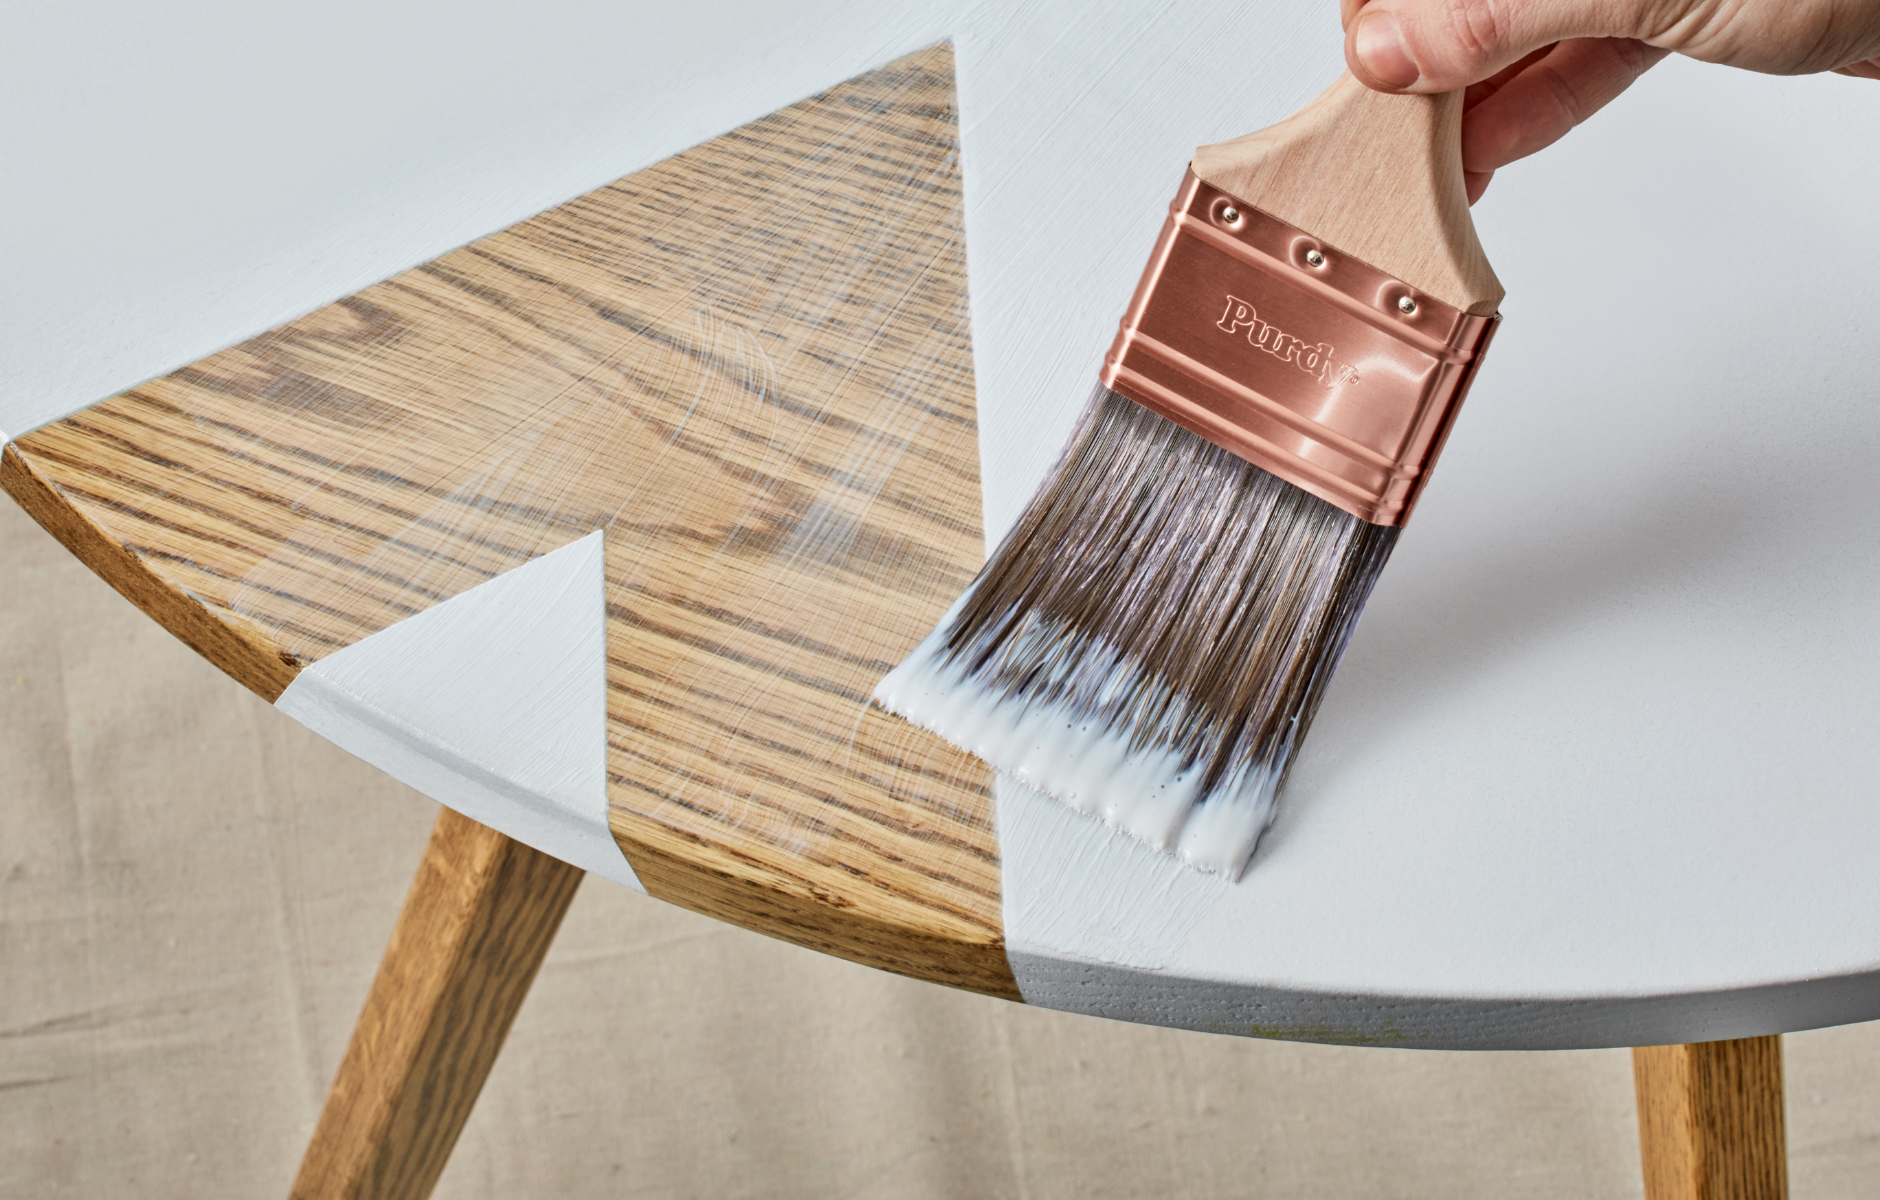 Painting a table